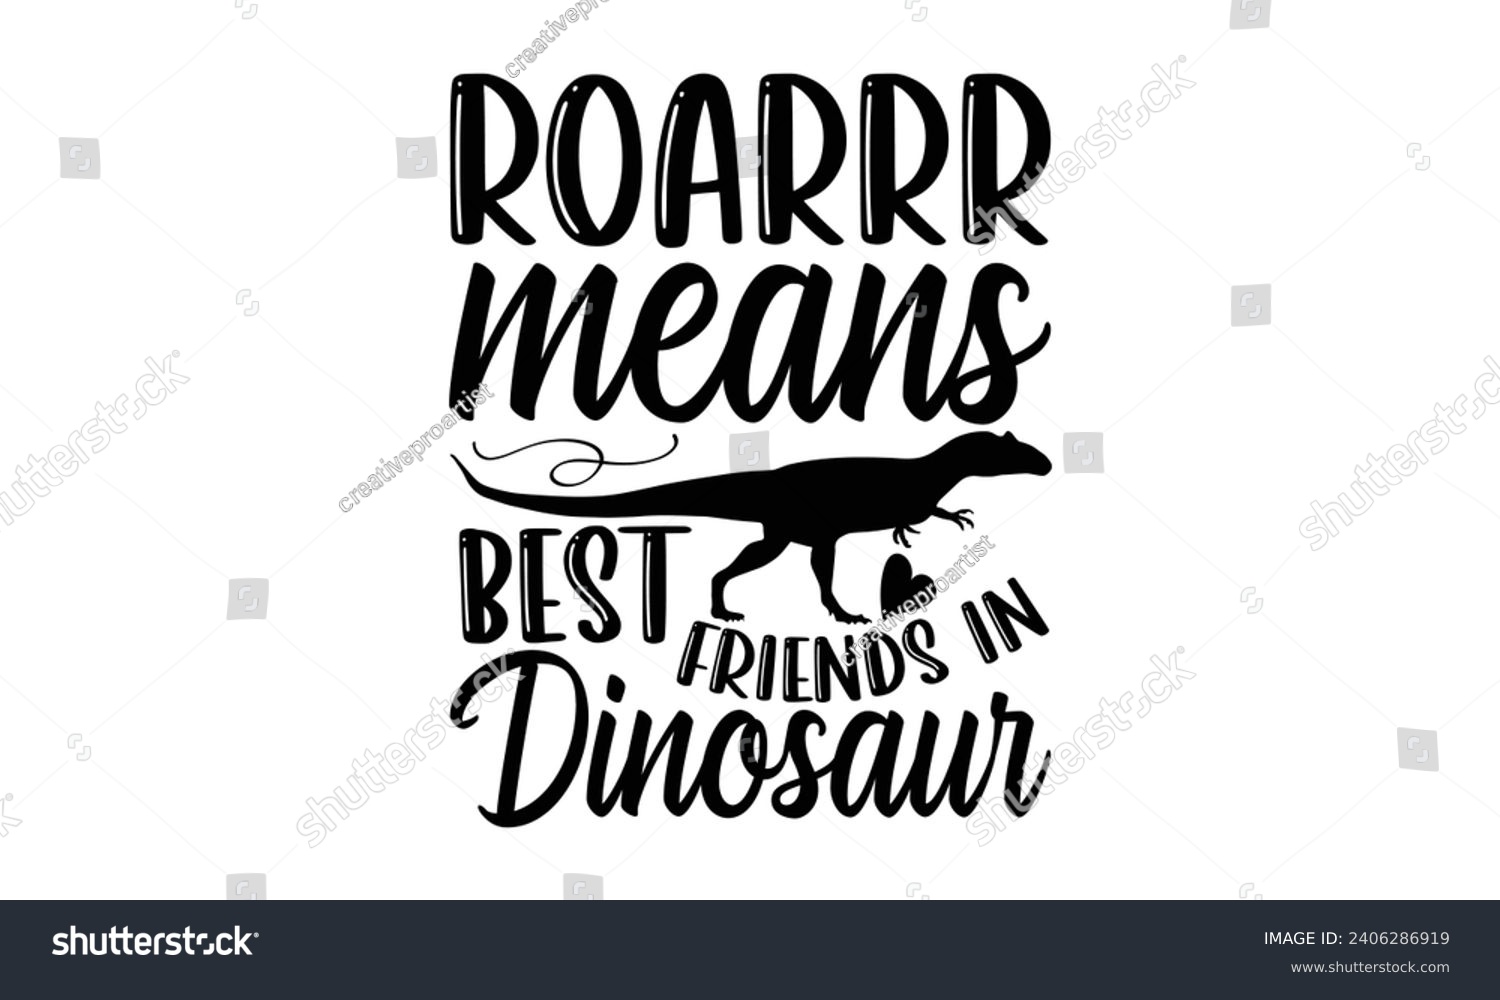 SVG of Roarrr Means Best Friends In Dinosaur- Best friends t- shirt design, Hand drawn vintage illustration with hand-lettering and decoration elements, greeting card template with typography text svg